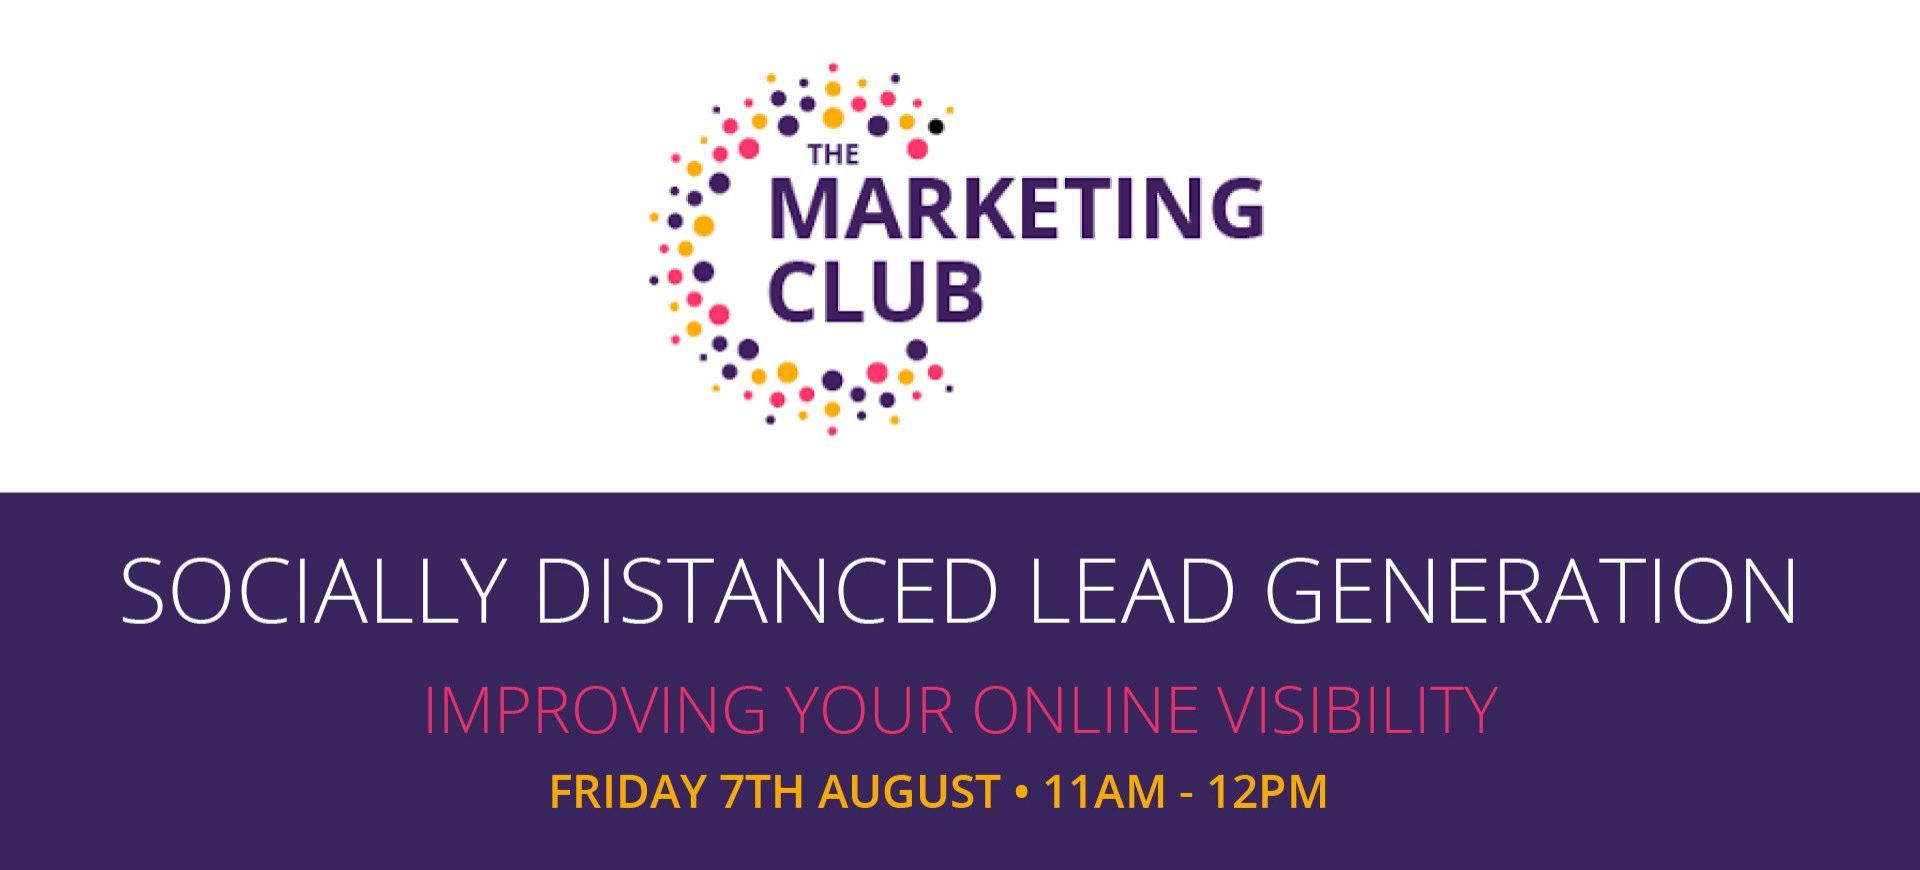 Improving your Online Visibility - Socially Distanced Lead Generation